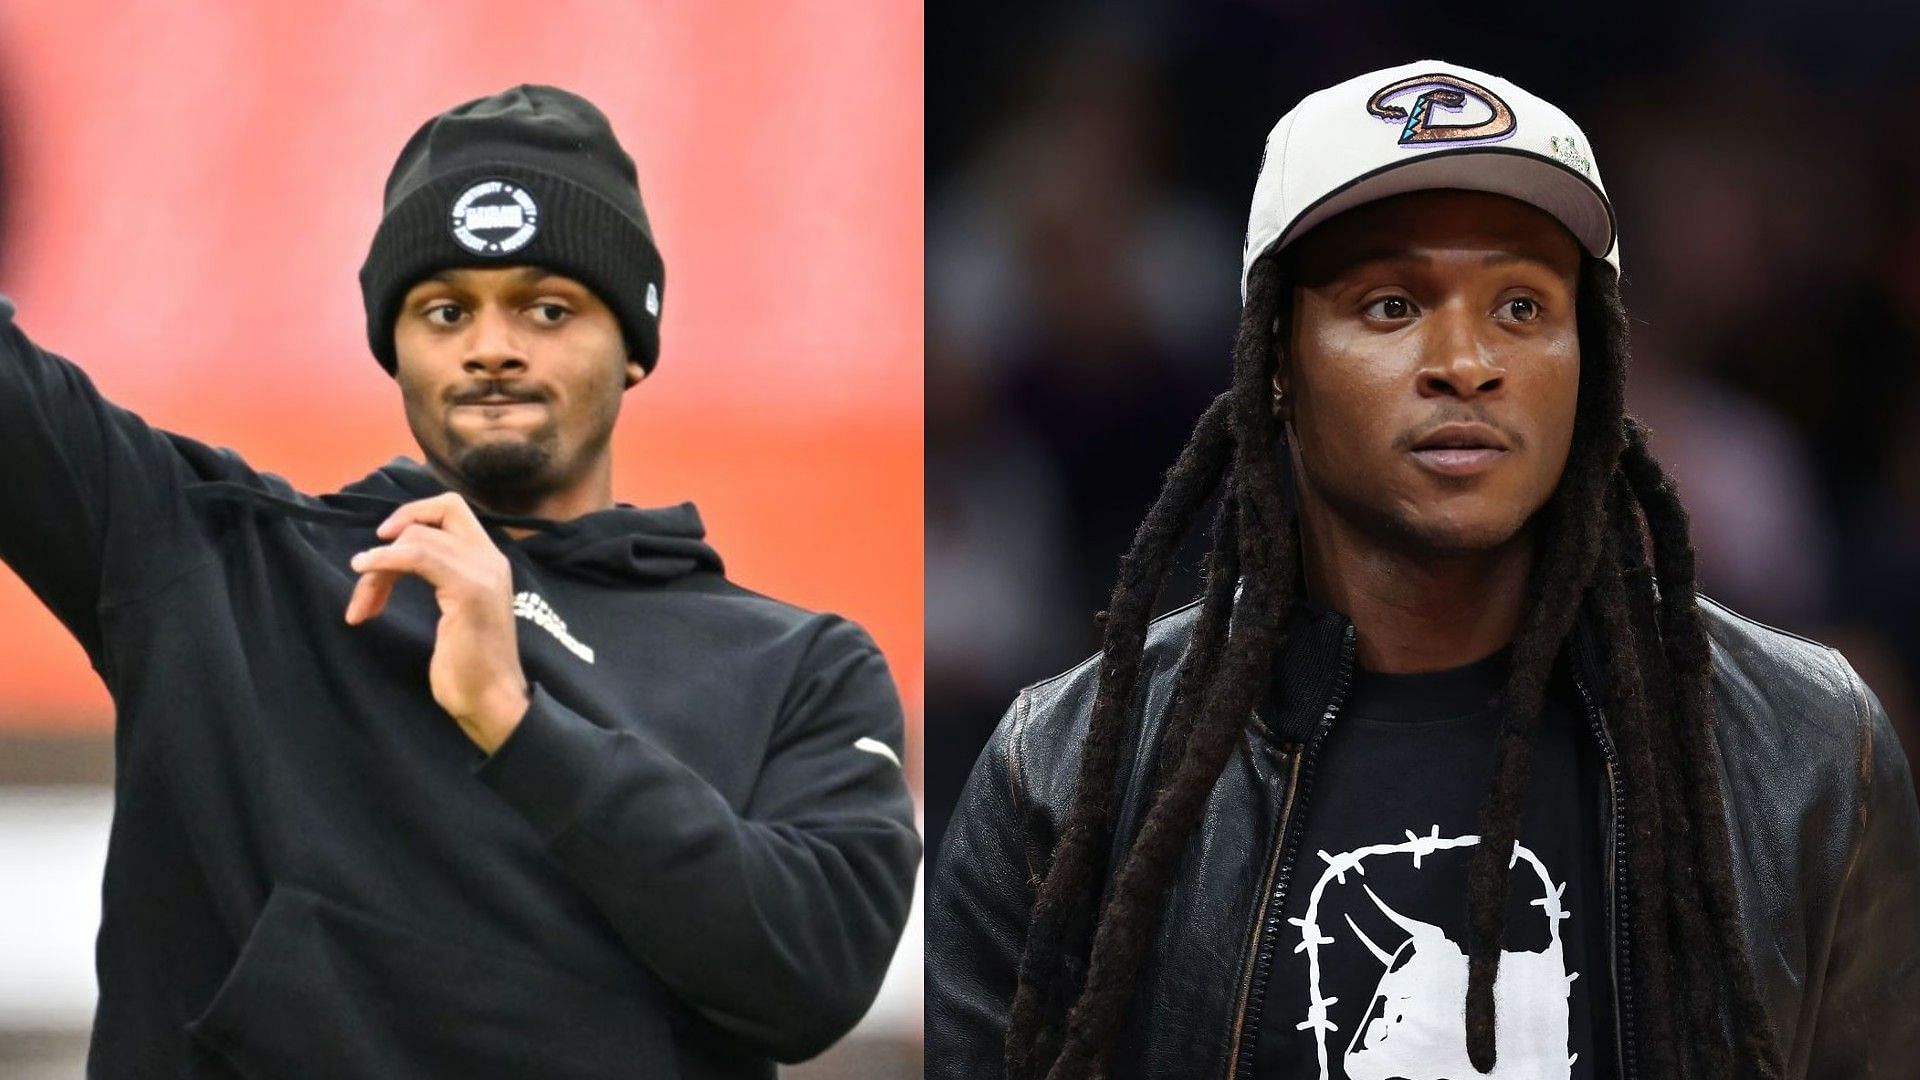 Sources: Deshaun Watson-DeAndre Hopkins reunion regarded as strong  possibility, and a return to Houston is not expected